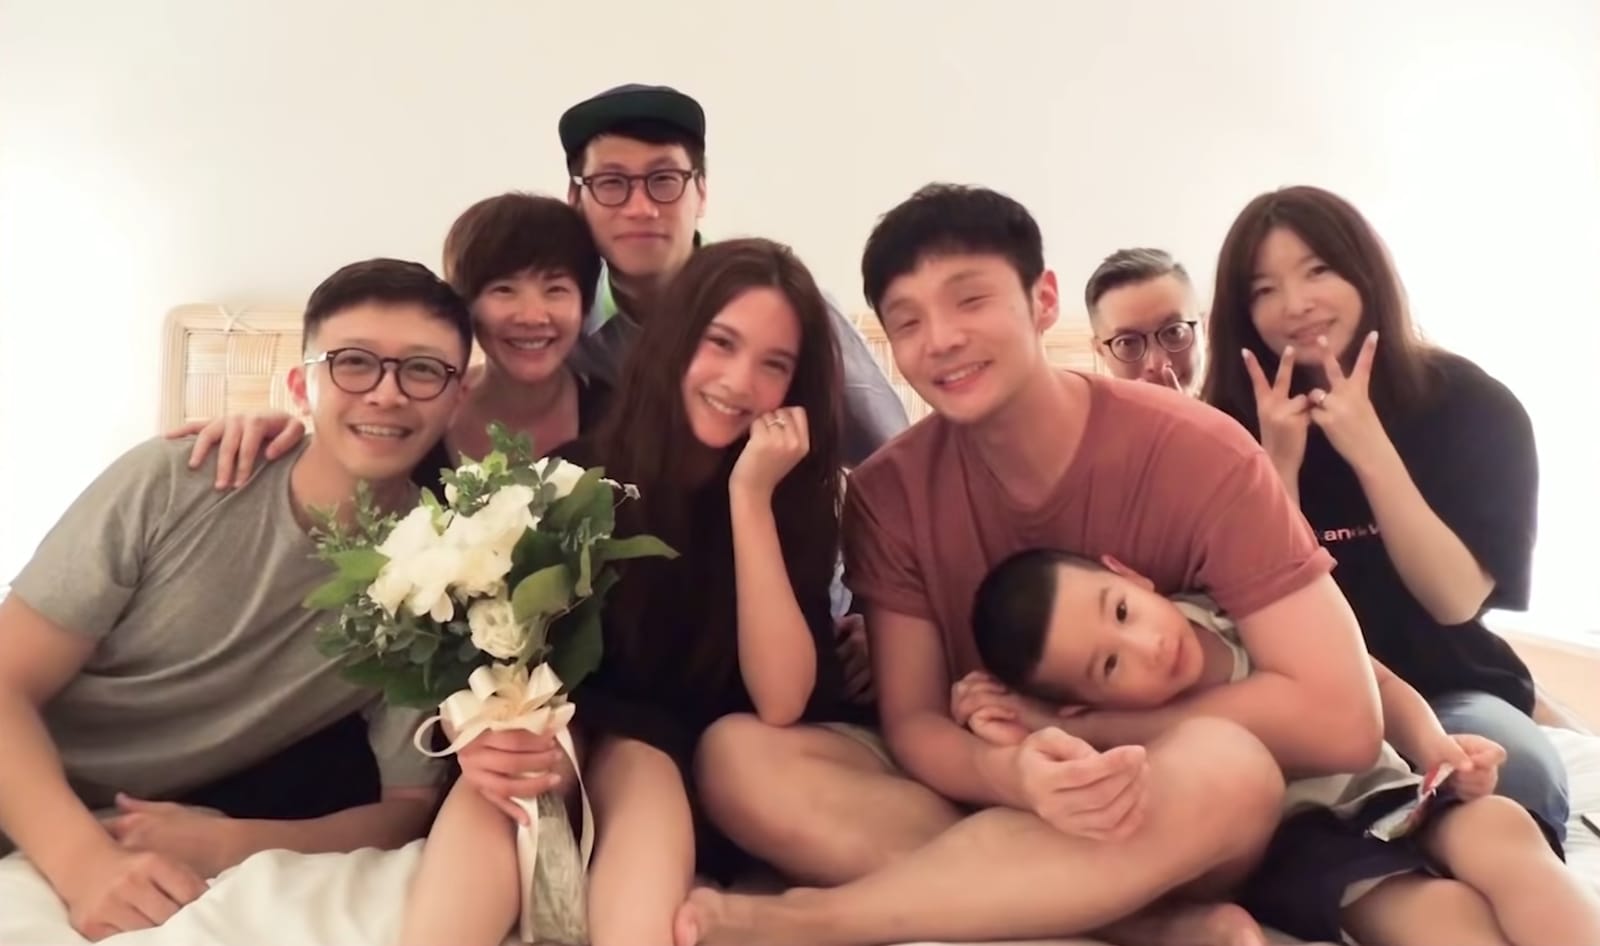 Rainie Yang Shared The Video Of Li Ronghao’s Surprise Proposal From A Year Ago And It Is The Cutest Thing Ever